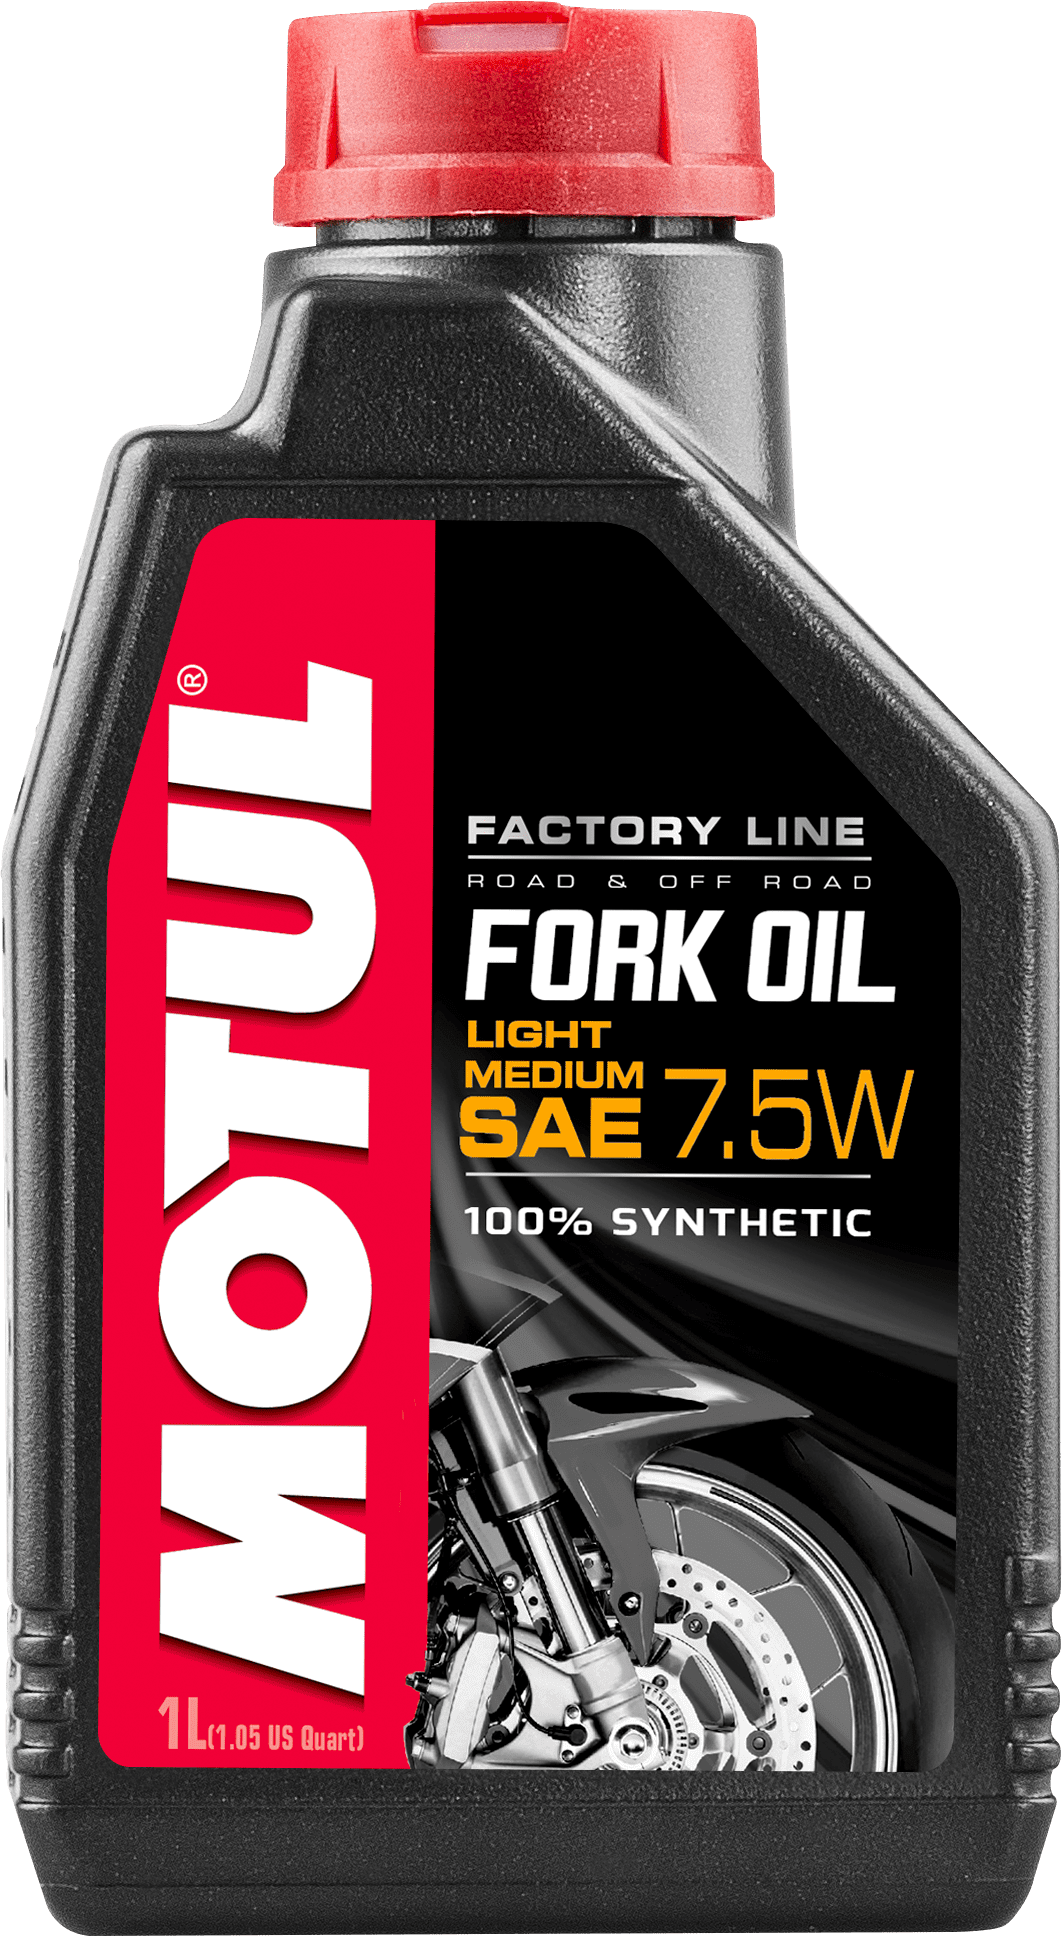 105926-1 100% synthetic high performance hydraulic fluid for racing telescopic Forks.